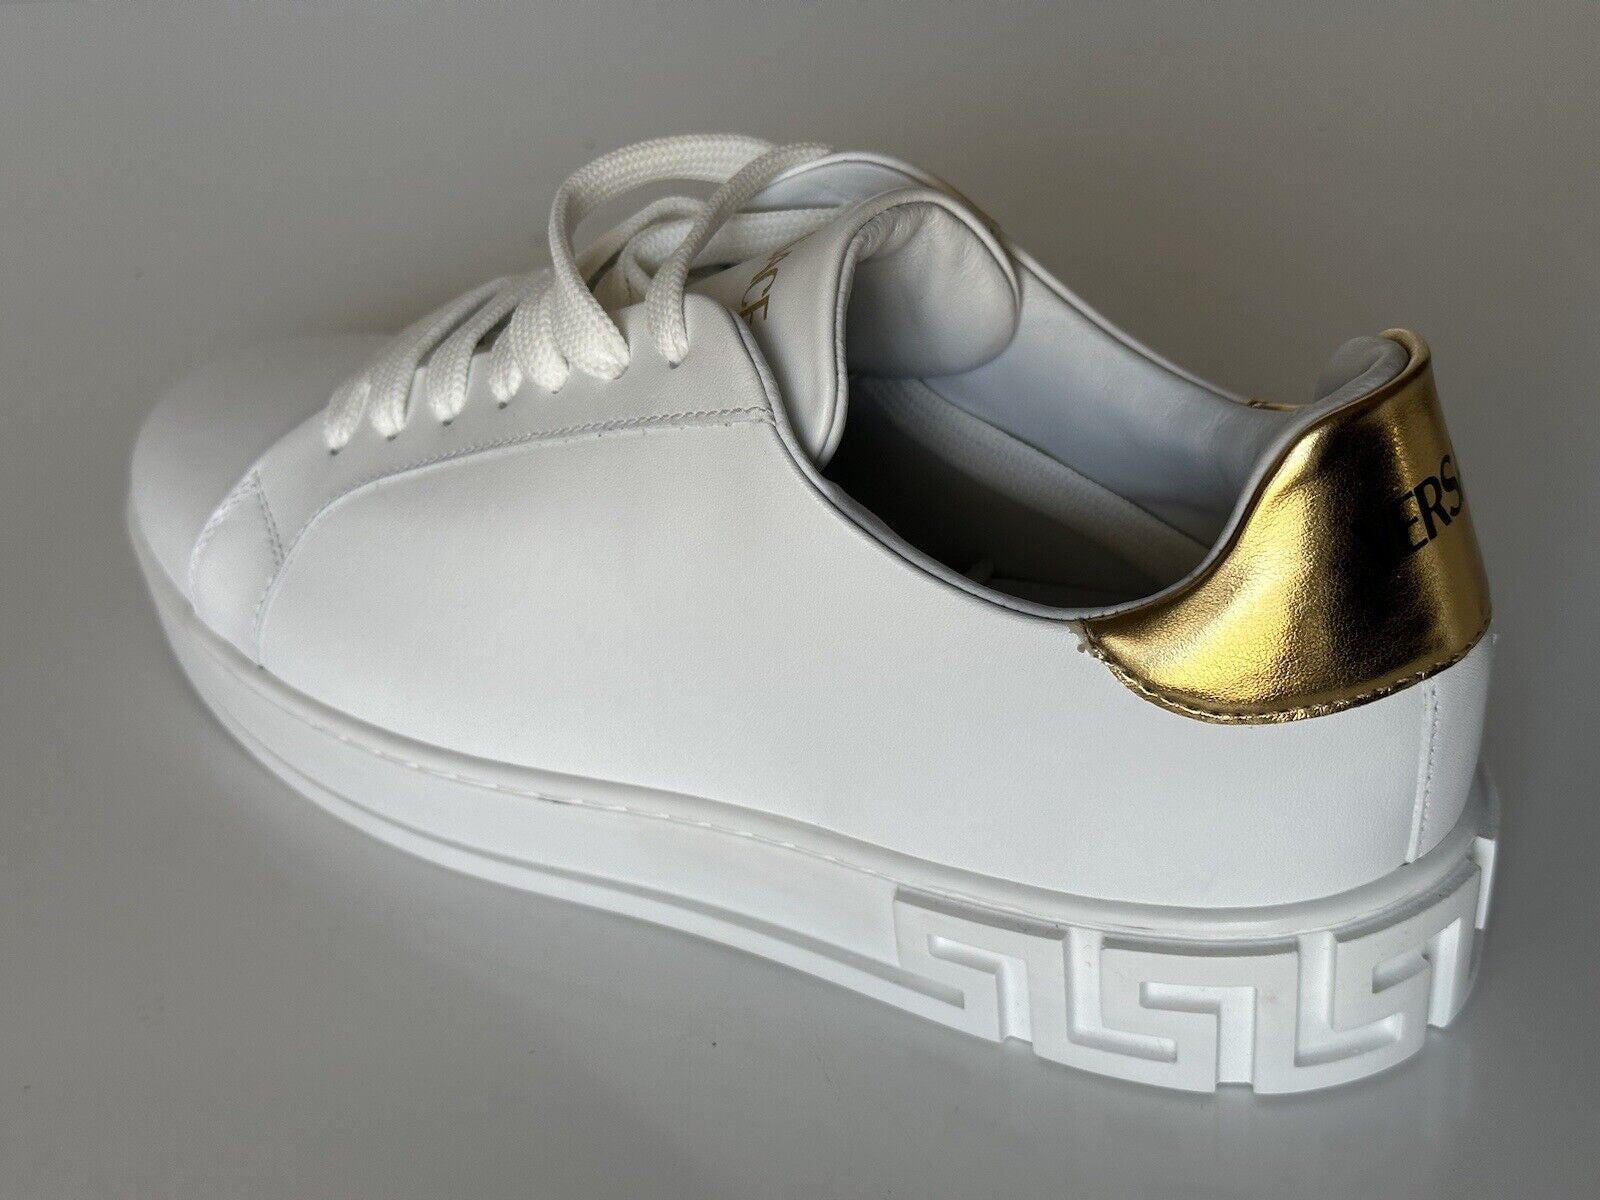 NIB Versace Low Top Women's White Leather Sneakers 9 US (39 Euro) Made in Italy